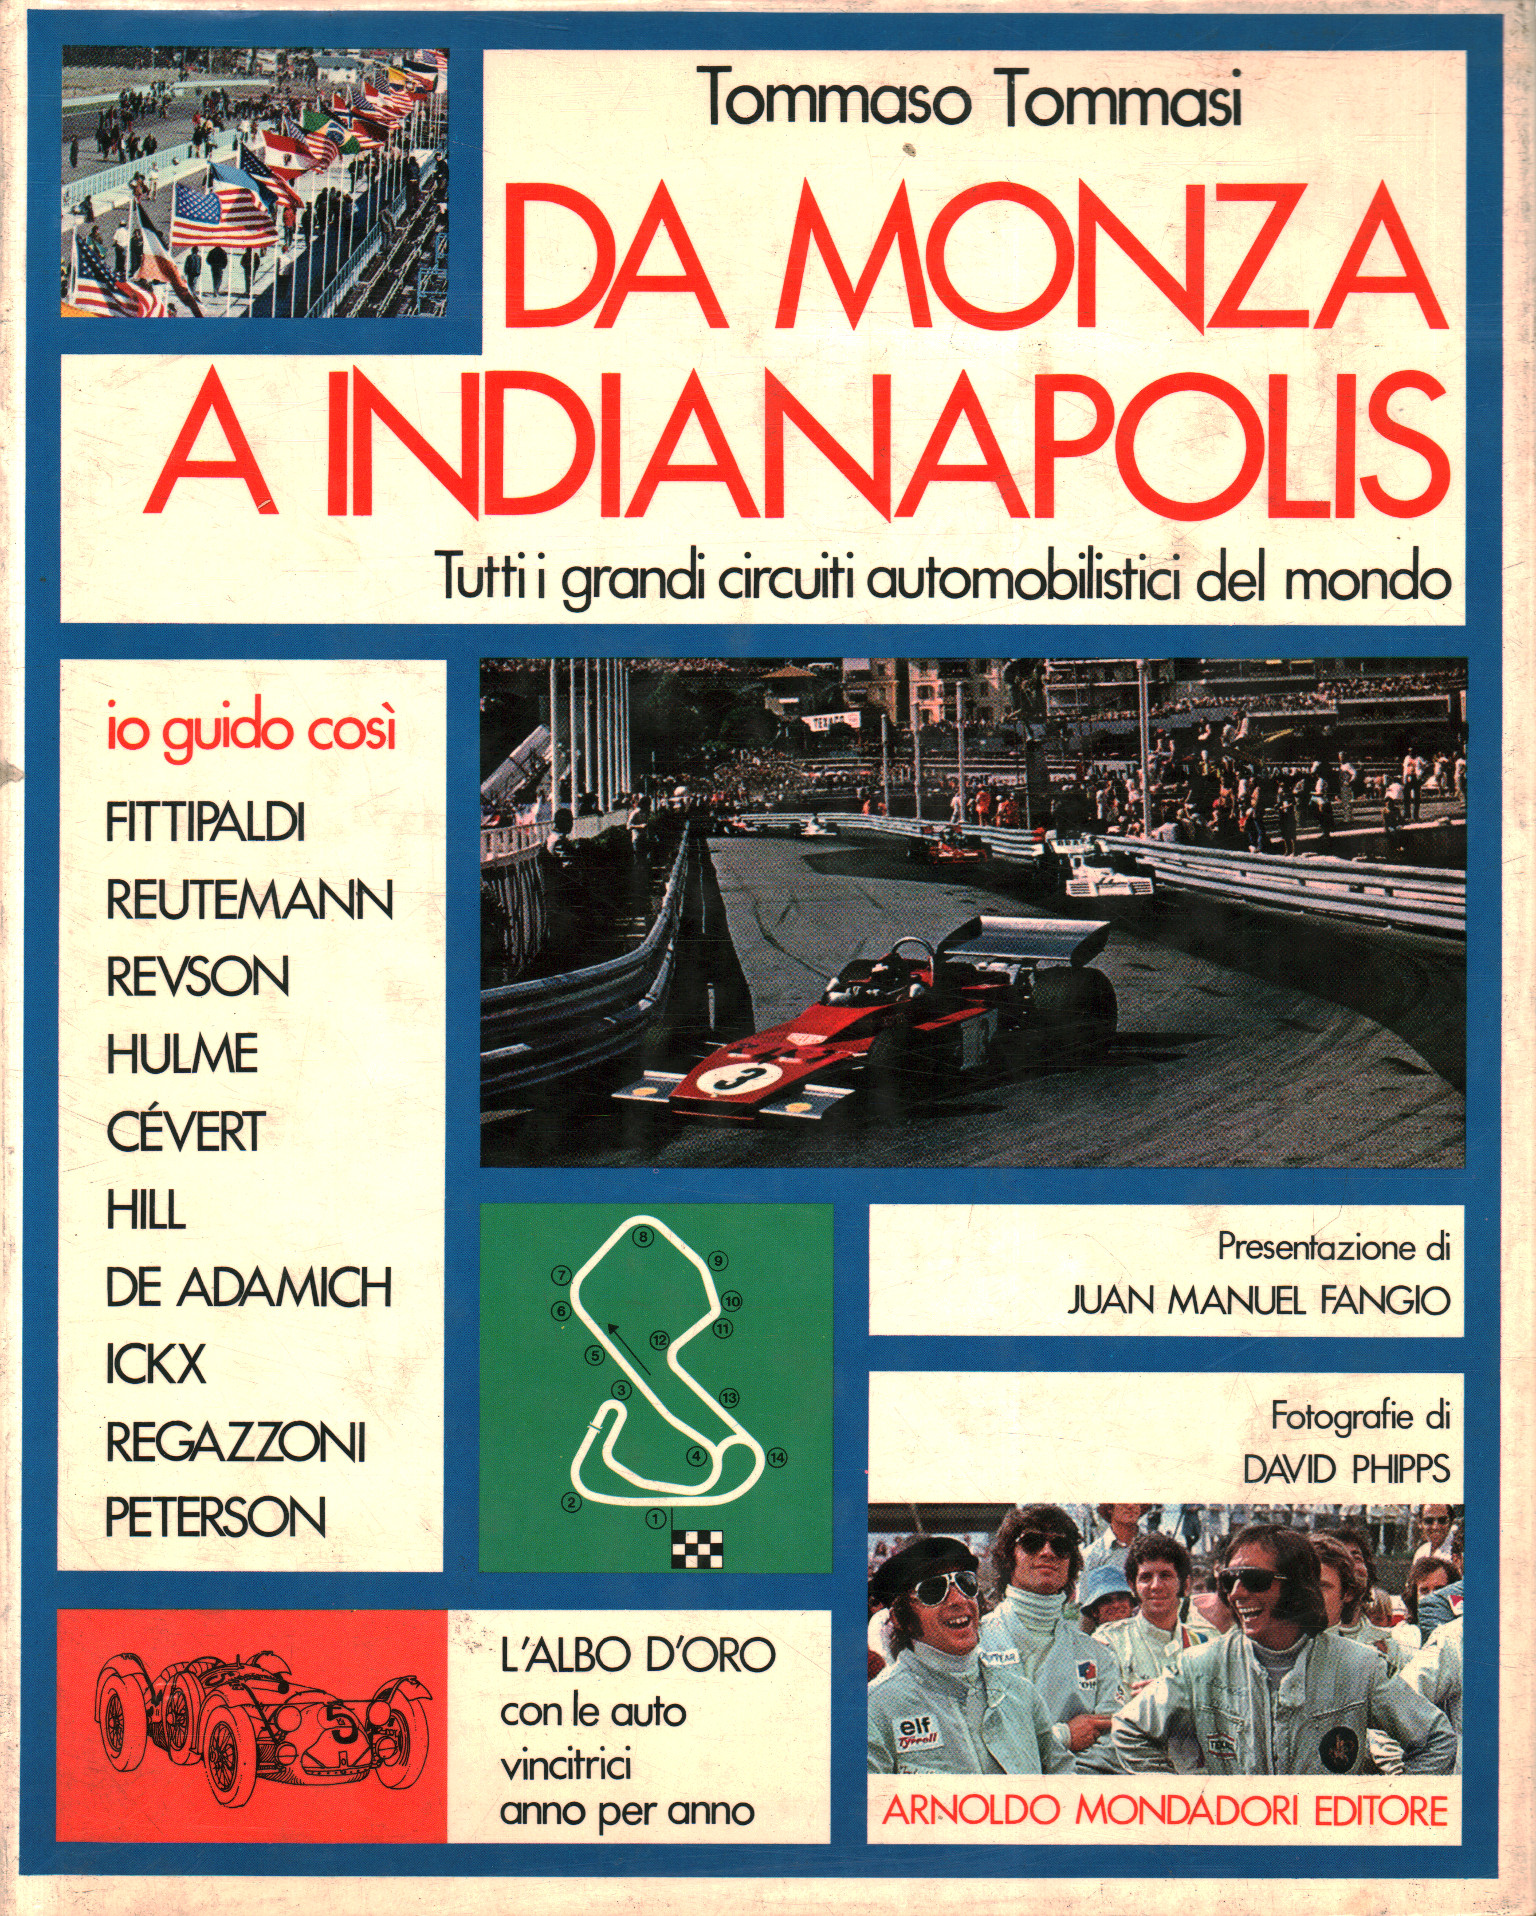 From Monza to Indianapolis